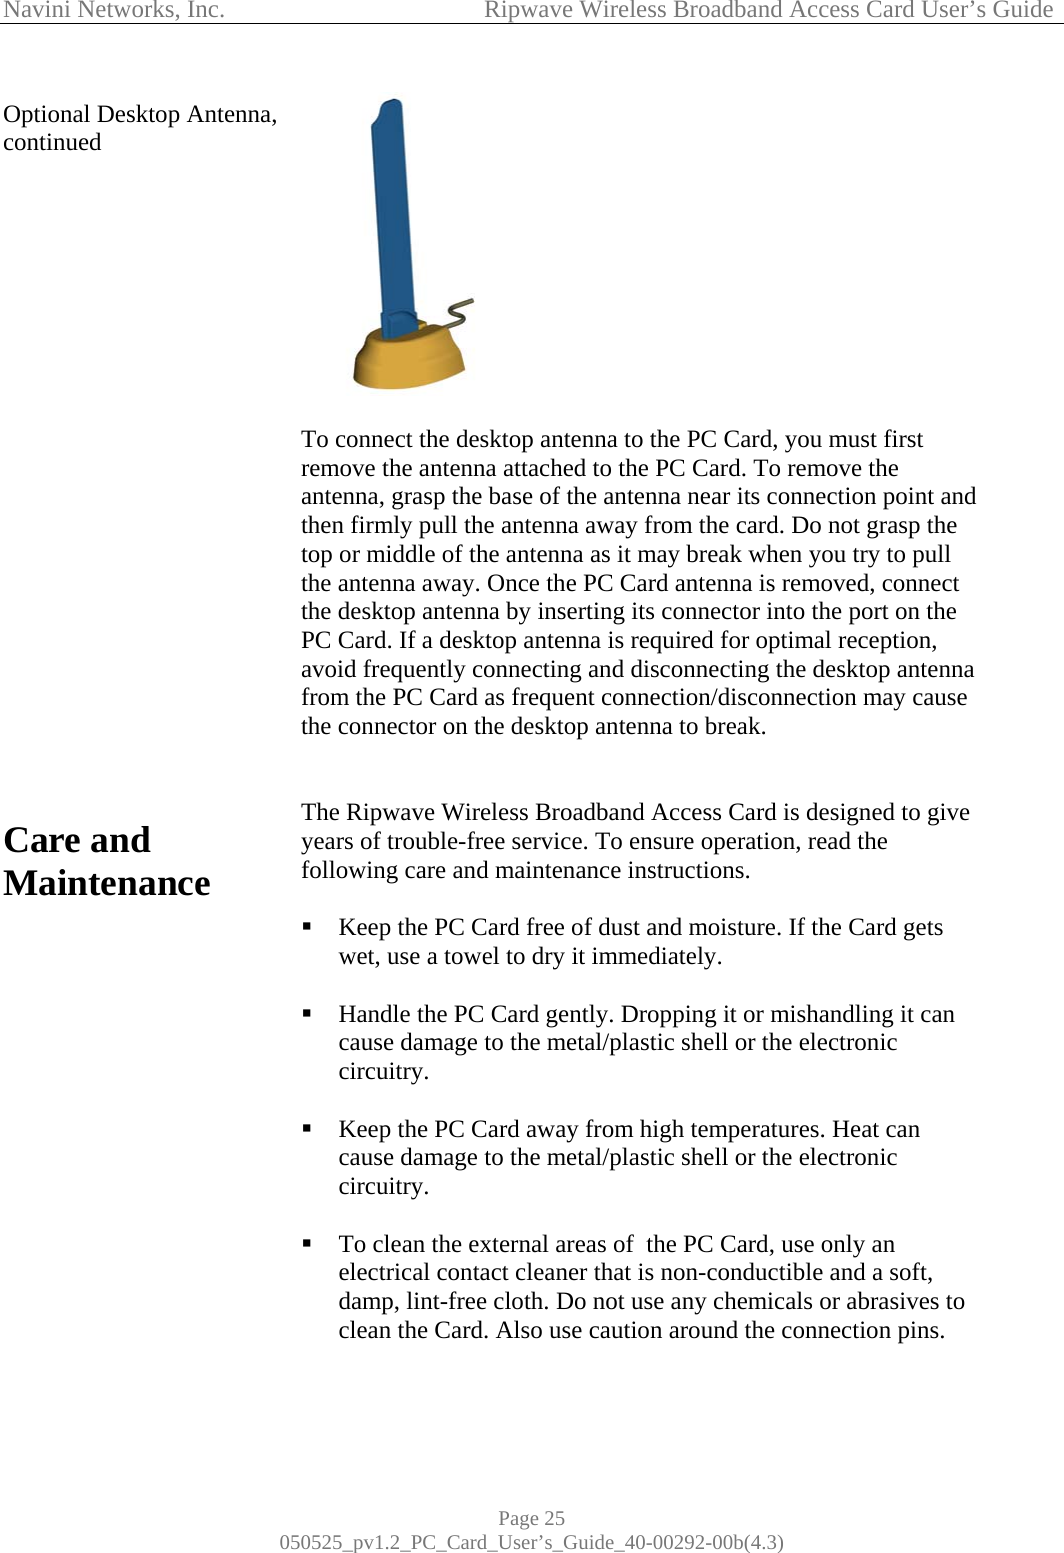 Navini Networks, Inc.            Ripwave Wireless Broadband Access Card User’s Guide Page 25 050525_pv1.2_PC_Card_User’s_Guide_40-00292-00b(4.3) Optional Desktop Antenna, continued                        Care and Maintenance                    To connect the desktop antenna to the PC Card, you must first remove the antenna attached to the PC Card. To remove the antenna, grasp the base of the antenna near its connection point and then firmly pull the antenna away from the card. Do not grasp the top or middle of the antenna as it may break when you try to pull the antenna away. Once the PC Card antenna is removed, connect the desktop antenna by inserting its connector into the port on the PC Card. If a desktop antenna is required for optimal reception, avoid frequently connecting and disconnecting the desktop antenna from the PC Card as frequent connection/disconnection may cause the connector on the desktop antenna to break.   The Ripwave Wireless Broadband Access Card is designed to give years of trouble-free service. To ensure operation, read the following care and maintenance instructions.   Keep the PC Card free of dust and moisture. If the Card gets wet, use a towel to dry it immediately.   Handle the PC Card gently. Dropping it or mishandling it can cause damage to the metal/plastic shell or the electronic circuitry.   Keep the PC Card away from high temperatures. Heat can cause damage to the metal/plastic shell or the electronic circuitry.   To clean the external areas of  the PC Card, use only an electrical contact cleaner that is non-conductible and a soft, damp, lint-free cloth. Do not use any chemicals or abrasives to clean the Card. Also use caution around the connection pins. 